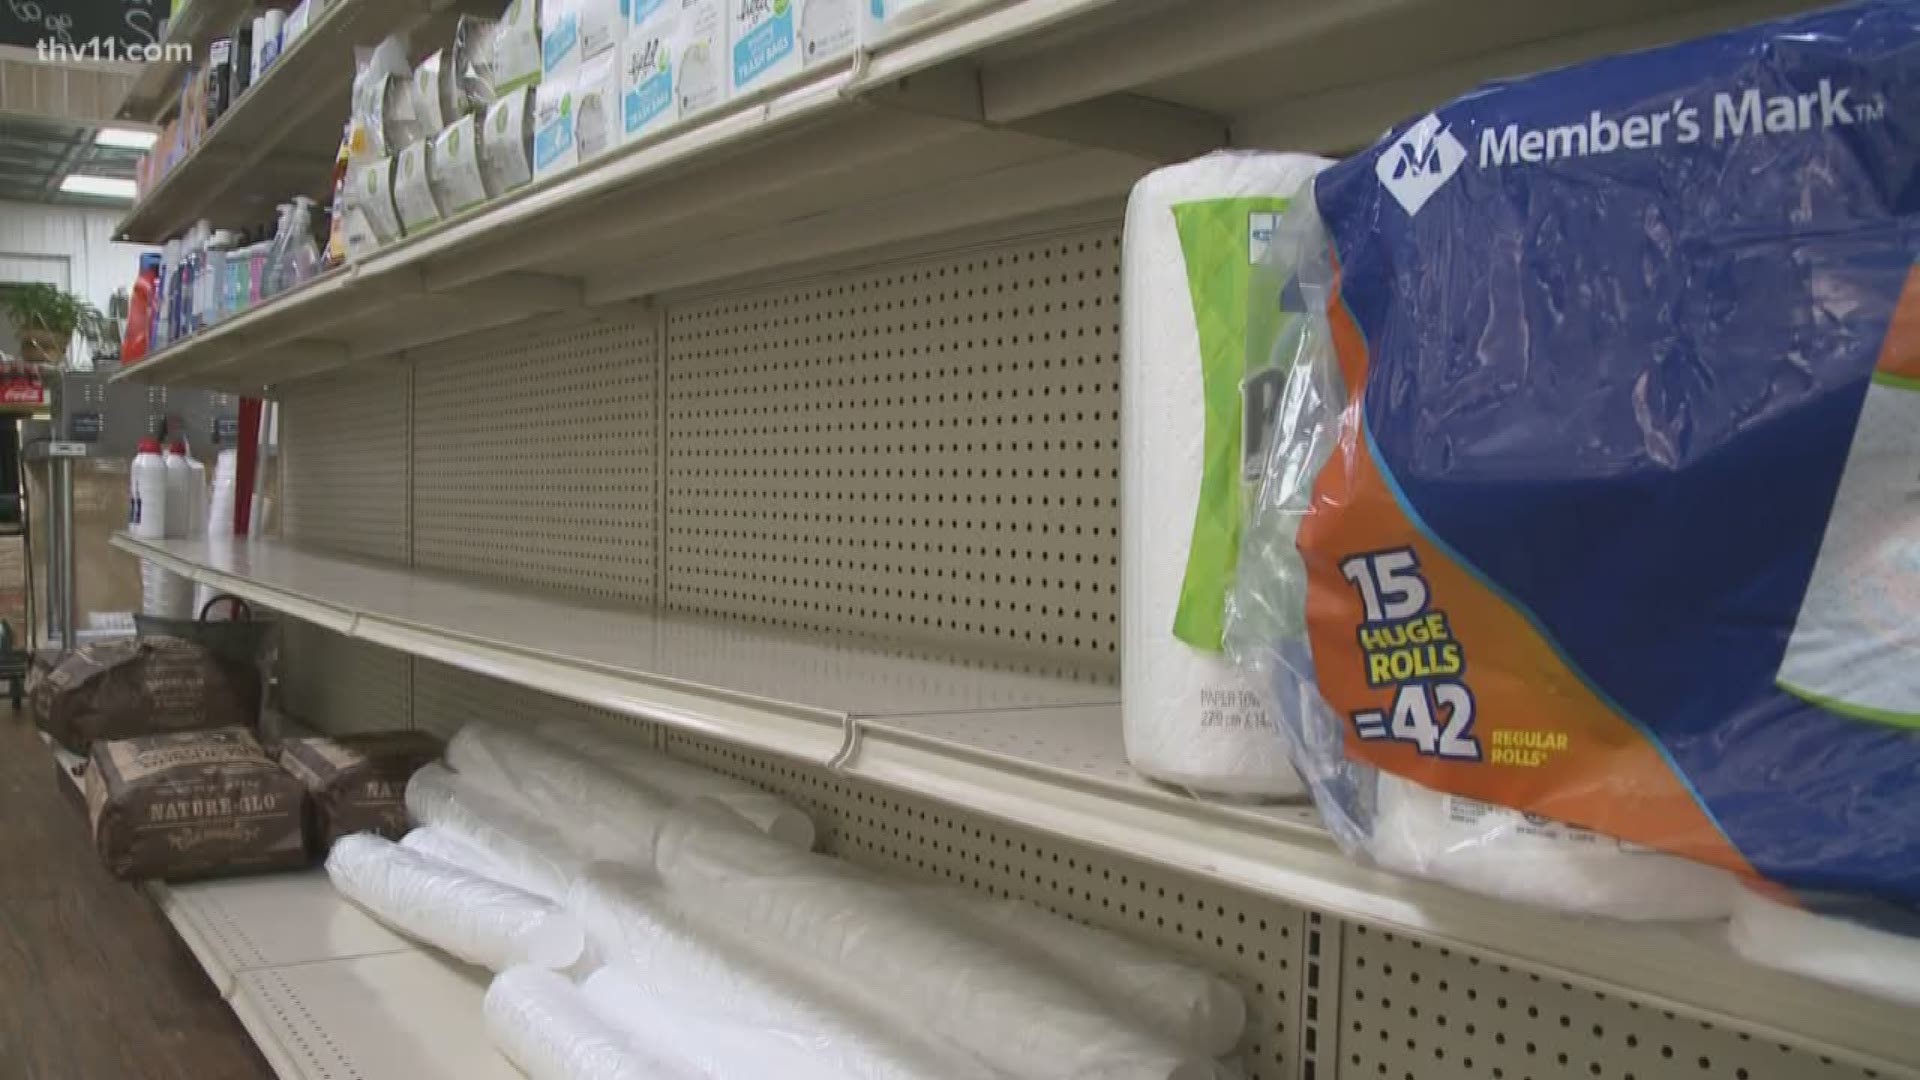 Grocery stores across town have seen an influx of customers after today's news.